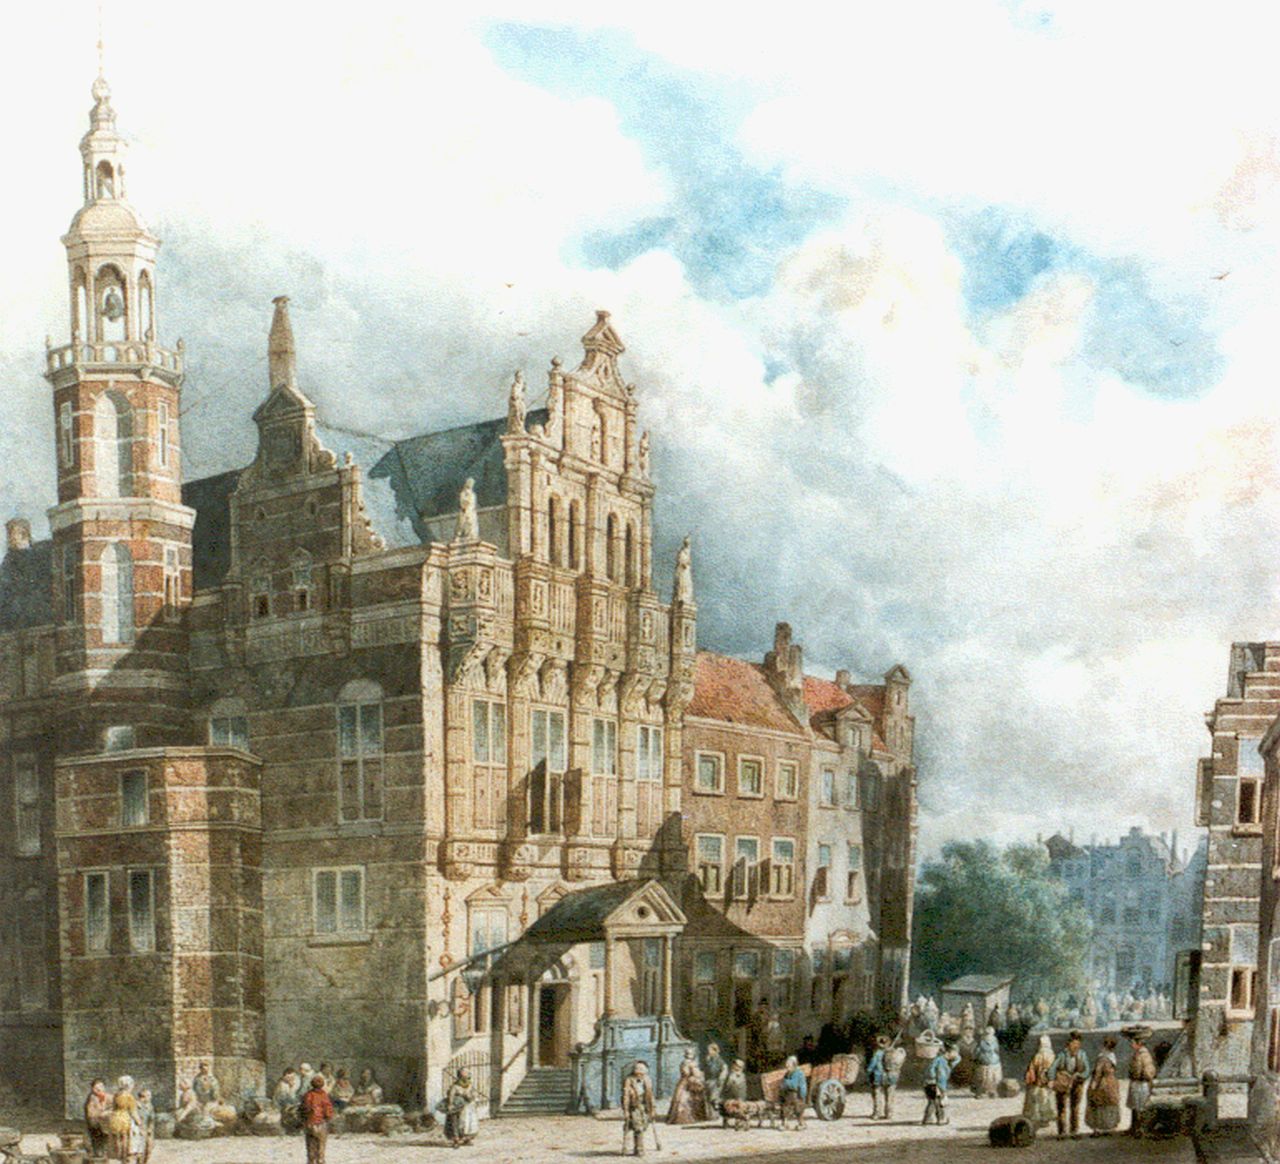 Vrolijk J.A.  | Jacobus 'Adriaan' Vrolijk, Figures on a village square, The Hague, watercolour on paper 40.2 x 43.0 cm, signed l.r. and dated 1860